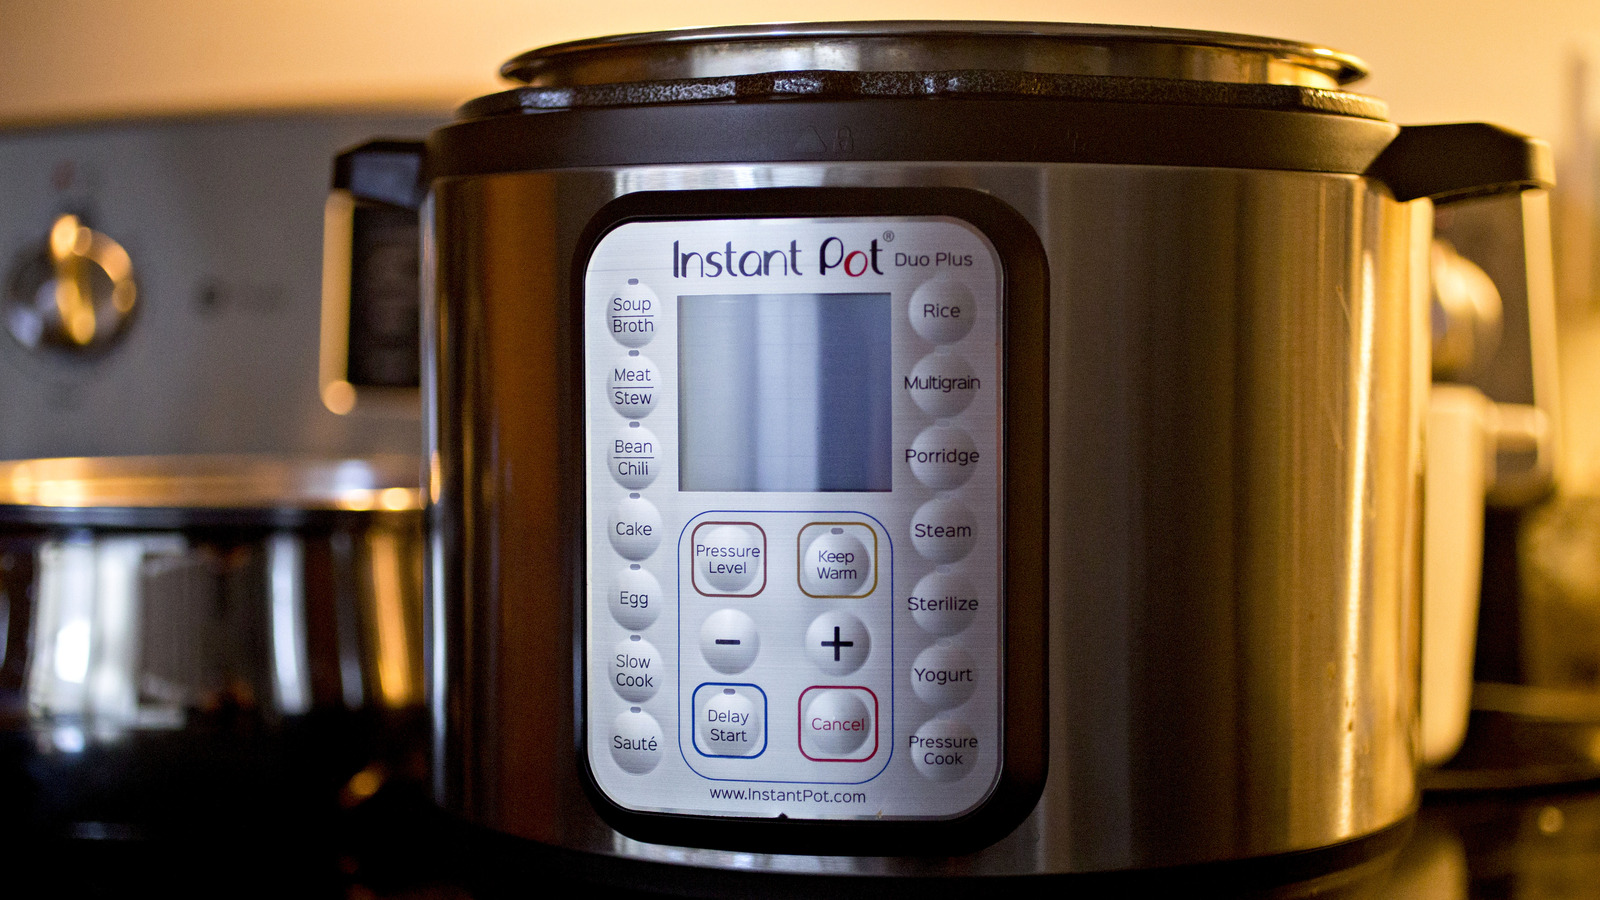 https://www.foodrepublic.com/img/gallery/instant-pot-functions-you-might-be-overlooking/l-intro-1701101355.jpg